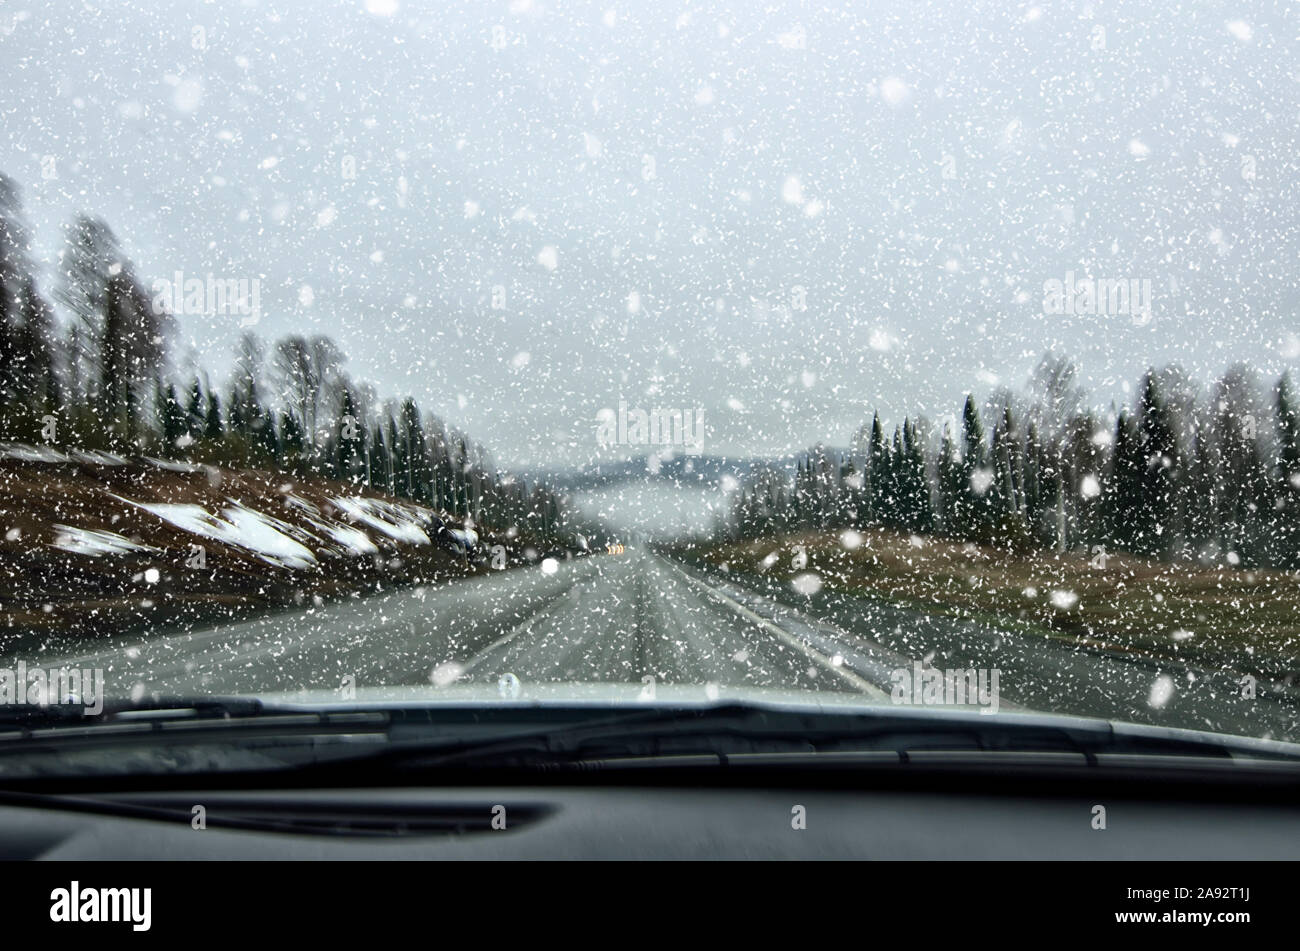 Vehicle safety in winter. Car driving in dangerous winter weather with poor visibility during snowfall and mist on the highway, concept for safety in Stock Photo